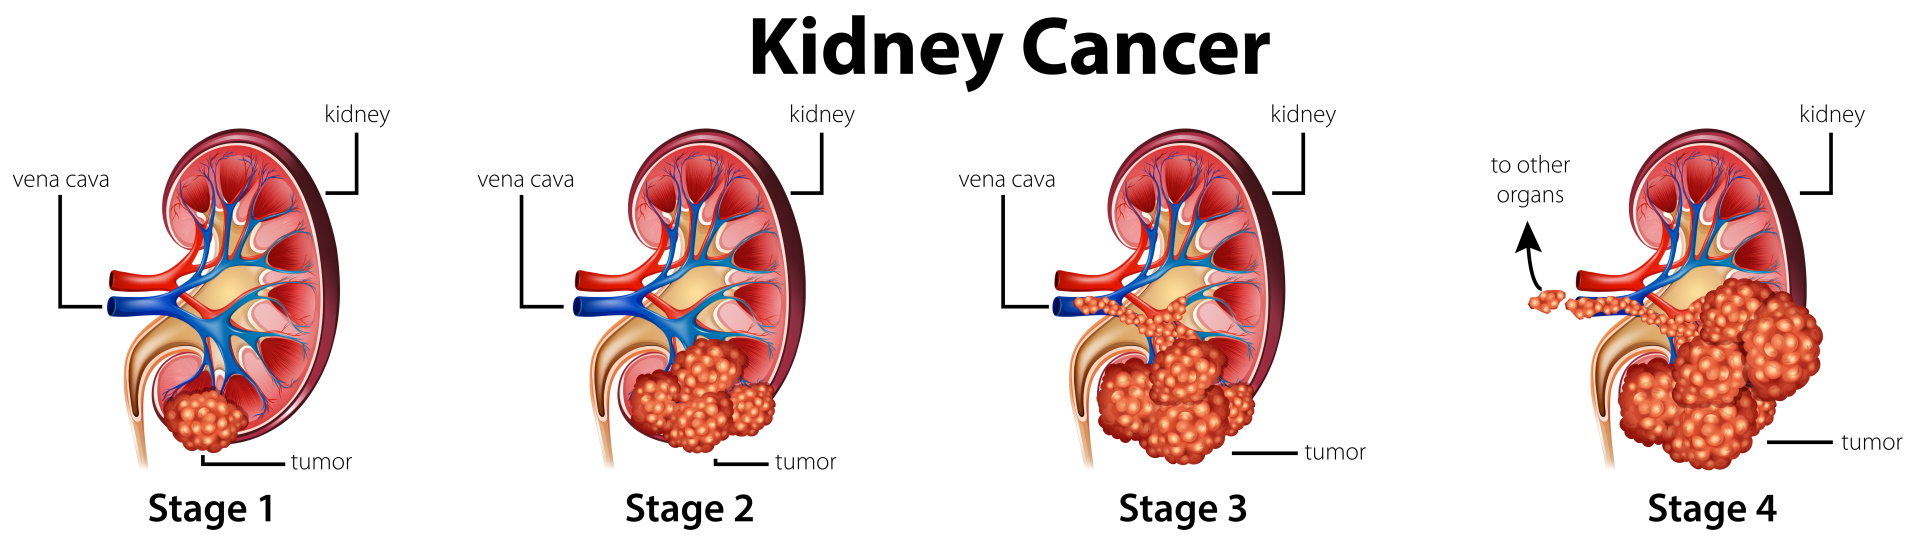 Kidney cancer, also called renal cancer, is one of the most common types of cancer in the world.